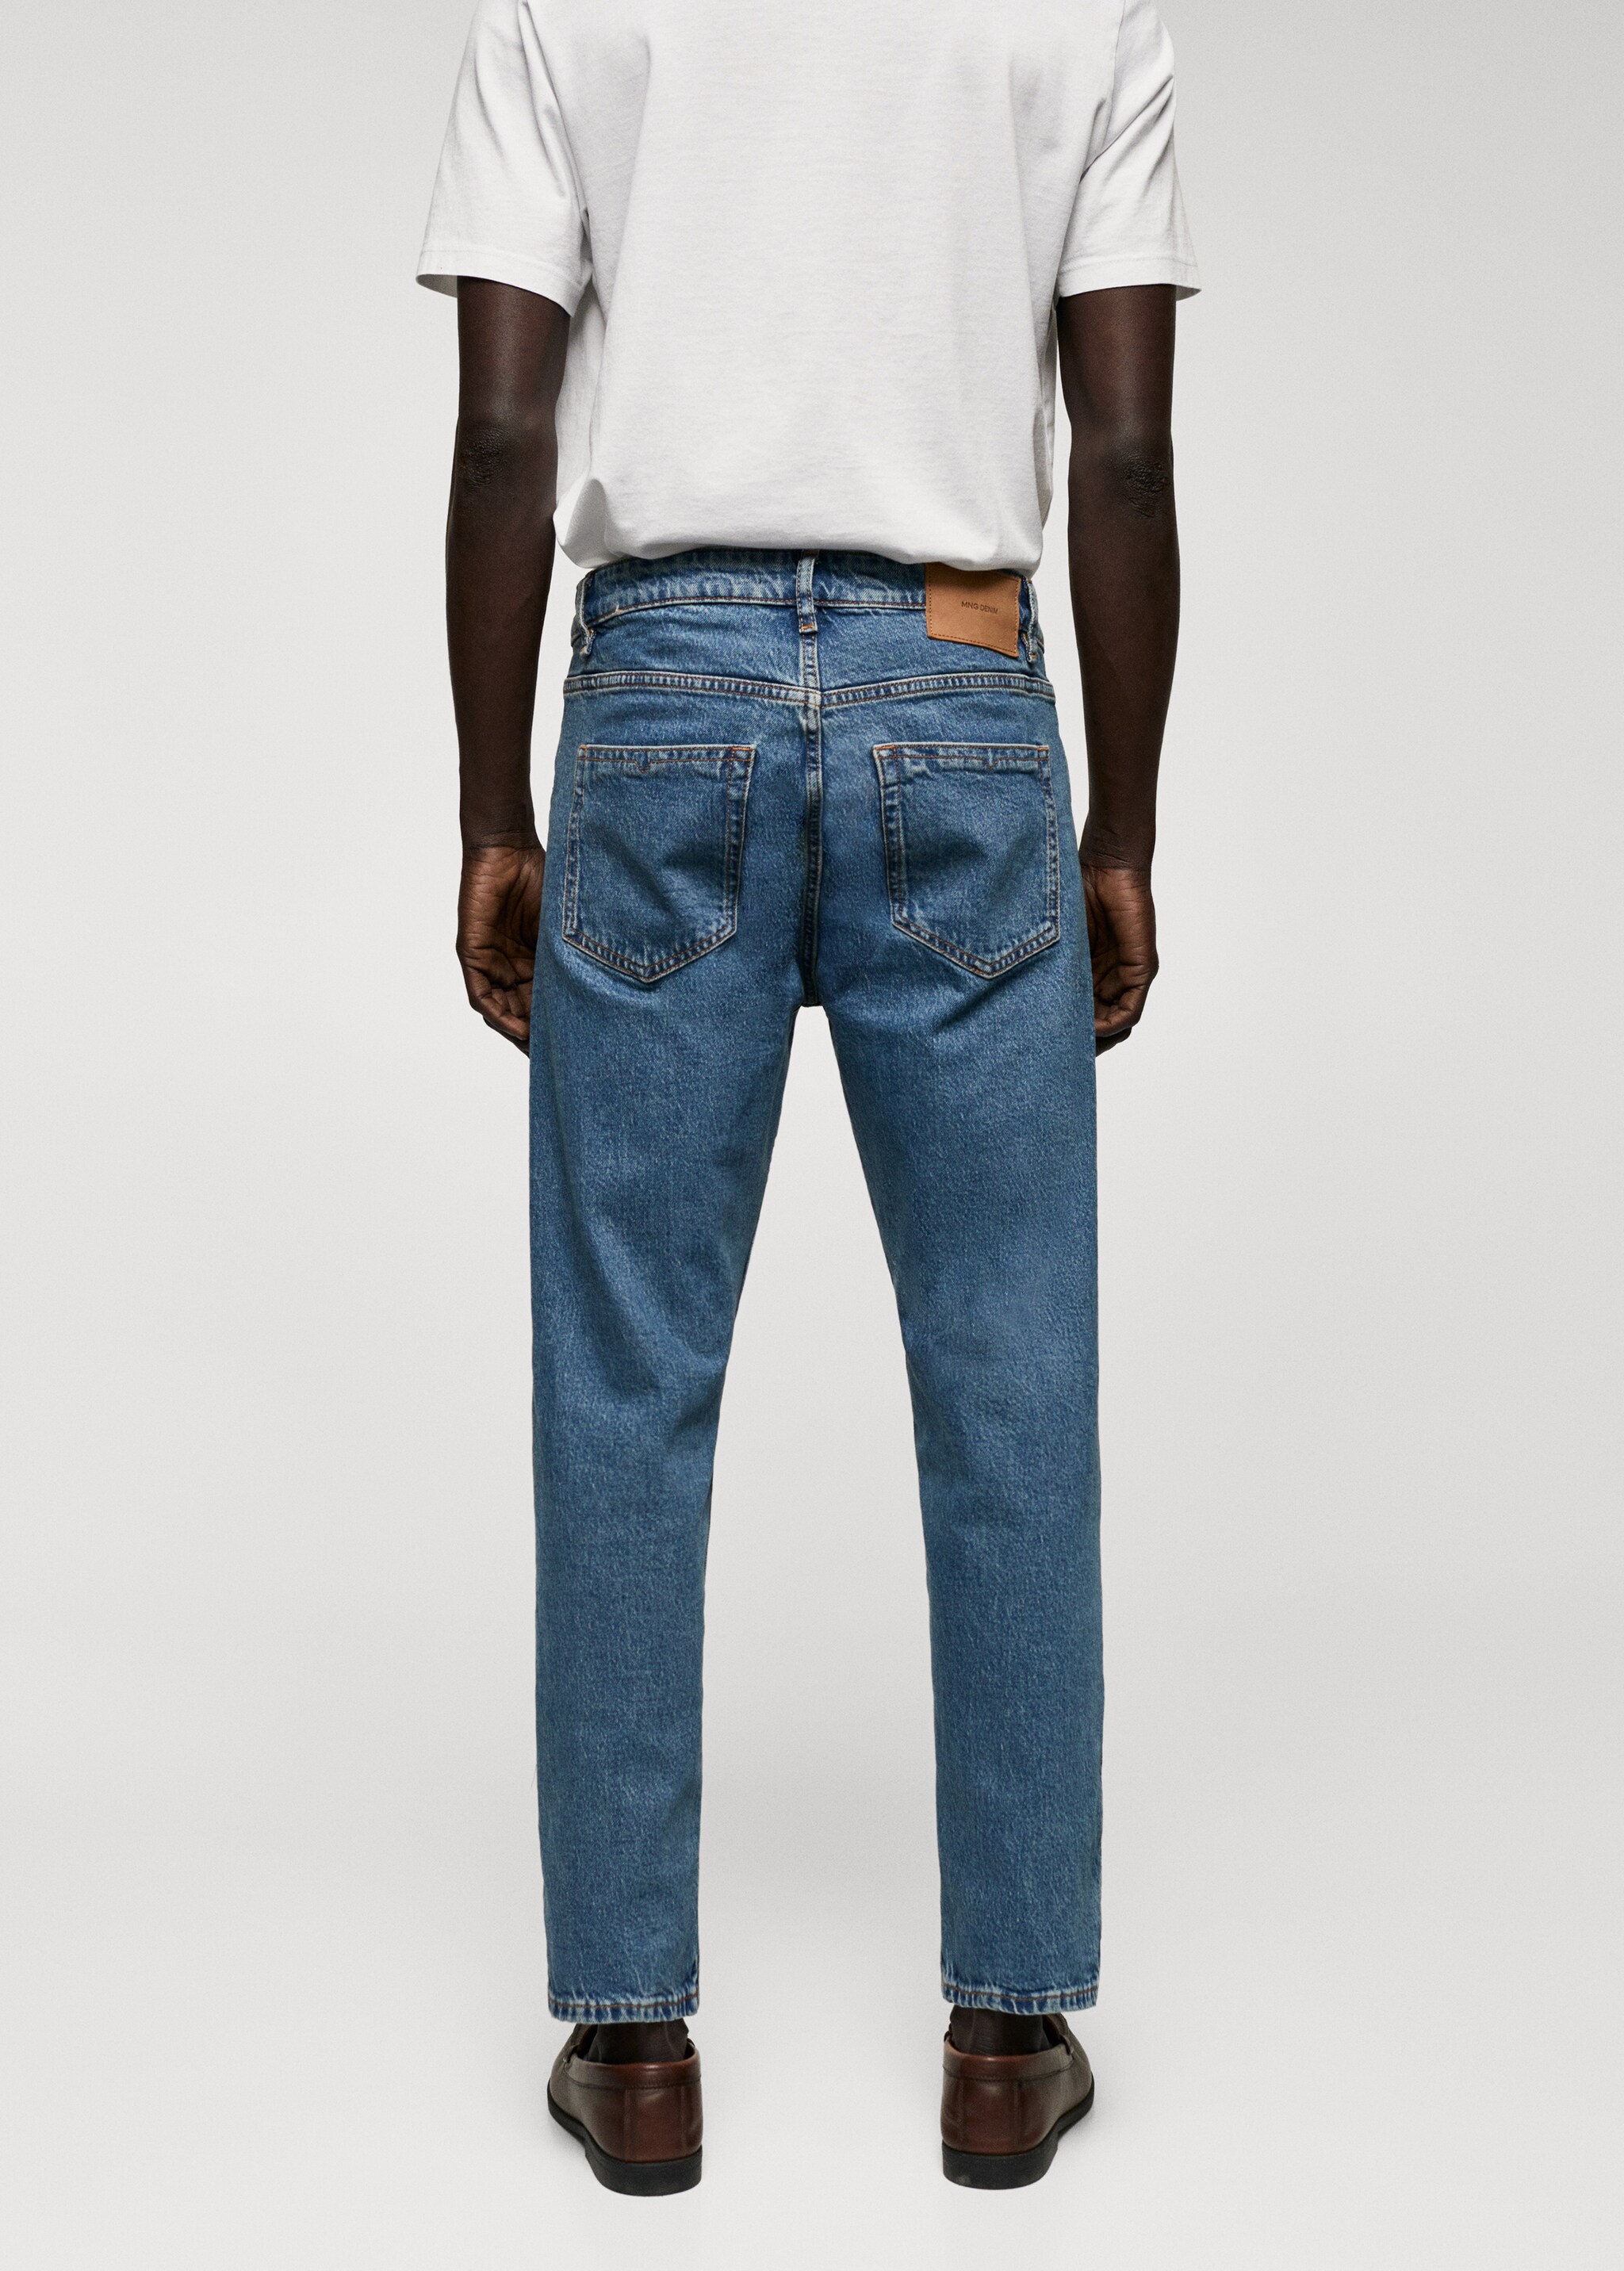 Texans Ben tapered cropped - Revers de l'article